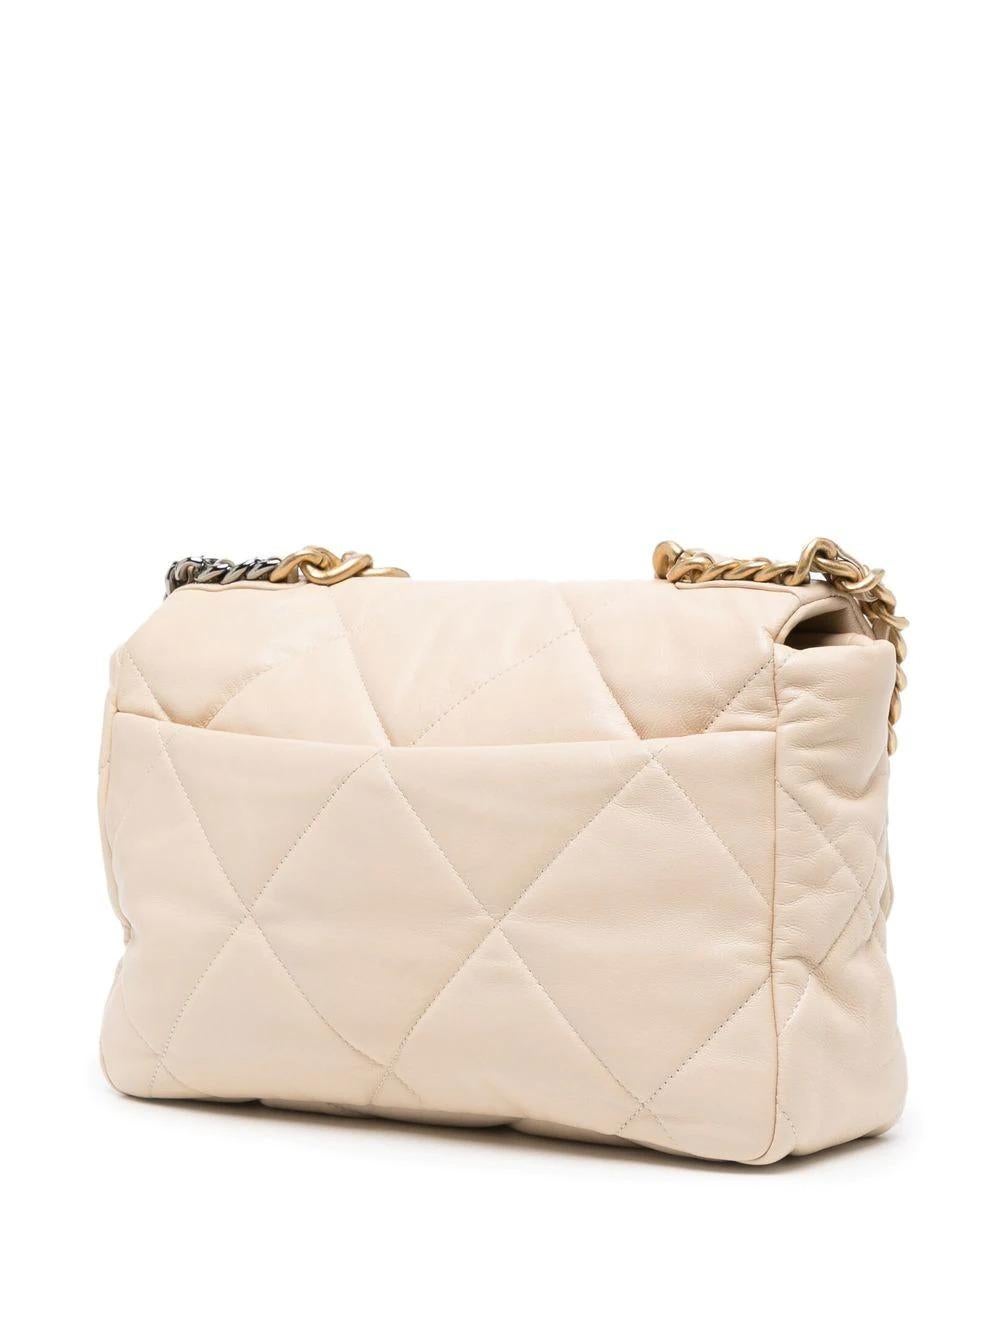 Crafted from beige lambskin leather, this pre-owned Chanel 19 has been designed in a padded, rectangular silhouette with the Maison's signature diamond quilting. Topped with the style chunky two-tone metal main and interwoven CC logo, this Large